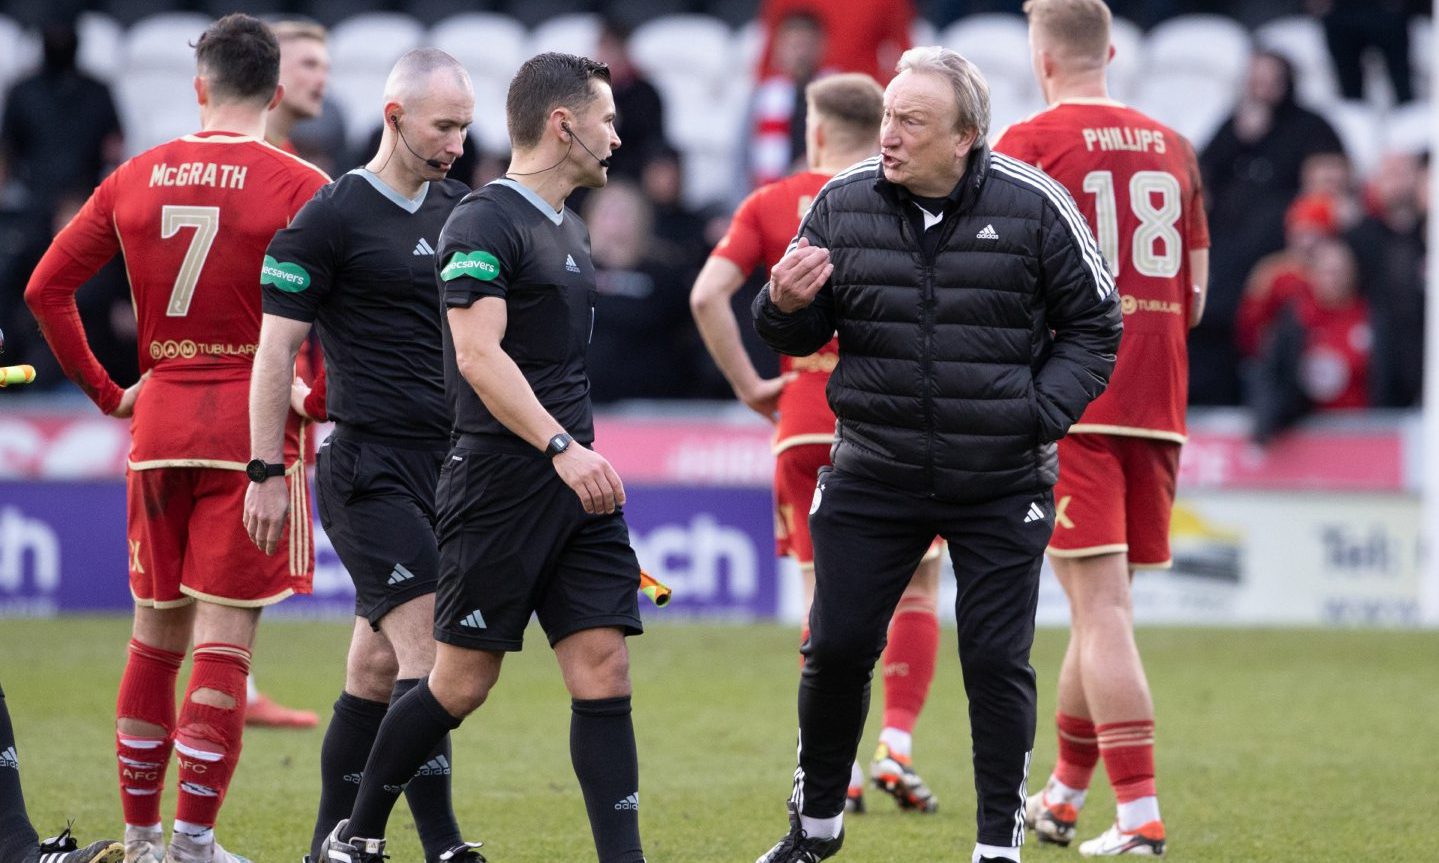 Aberdeen manager Neil Warnock speaks to referee Nick Walsh following the 2-1 defeat against St Mirren.